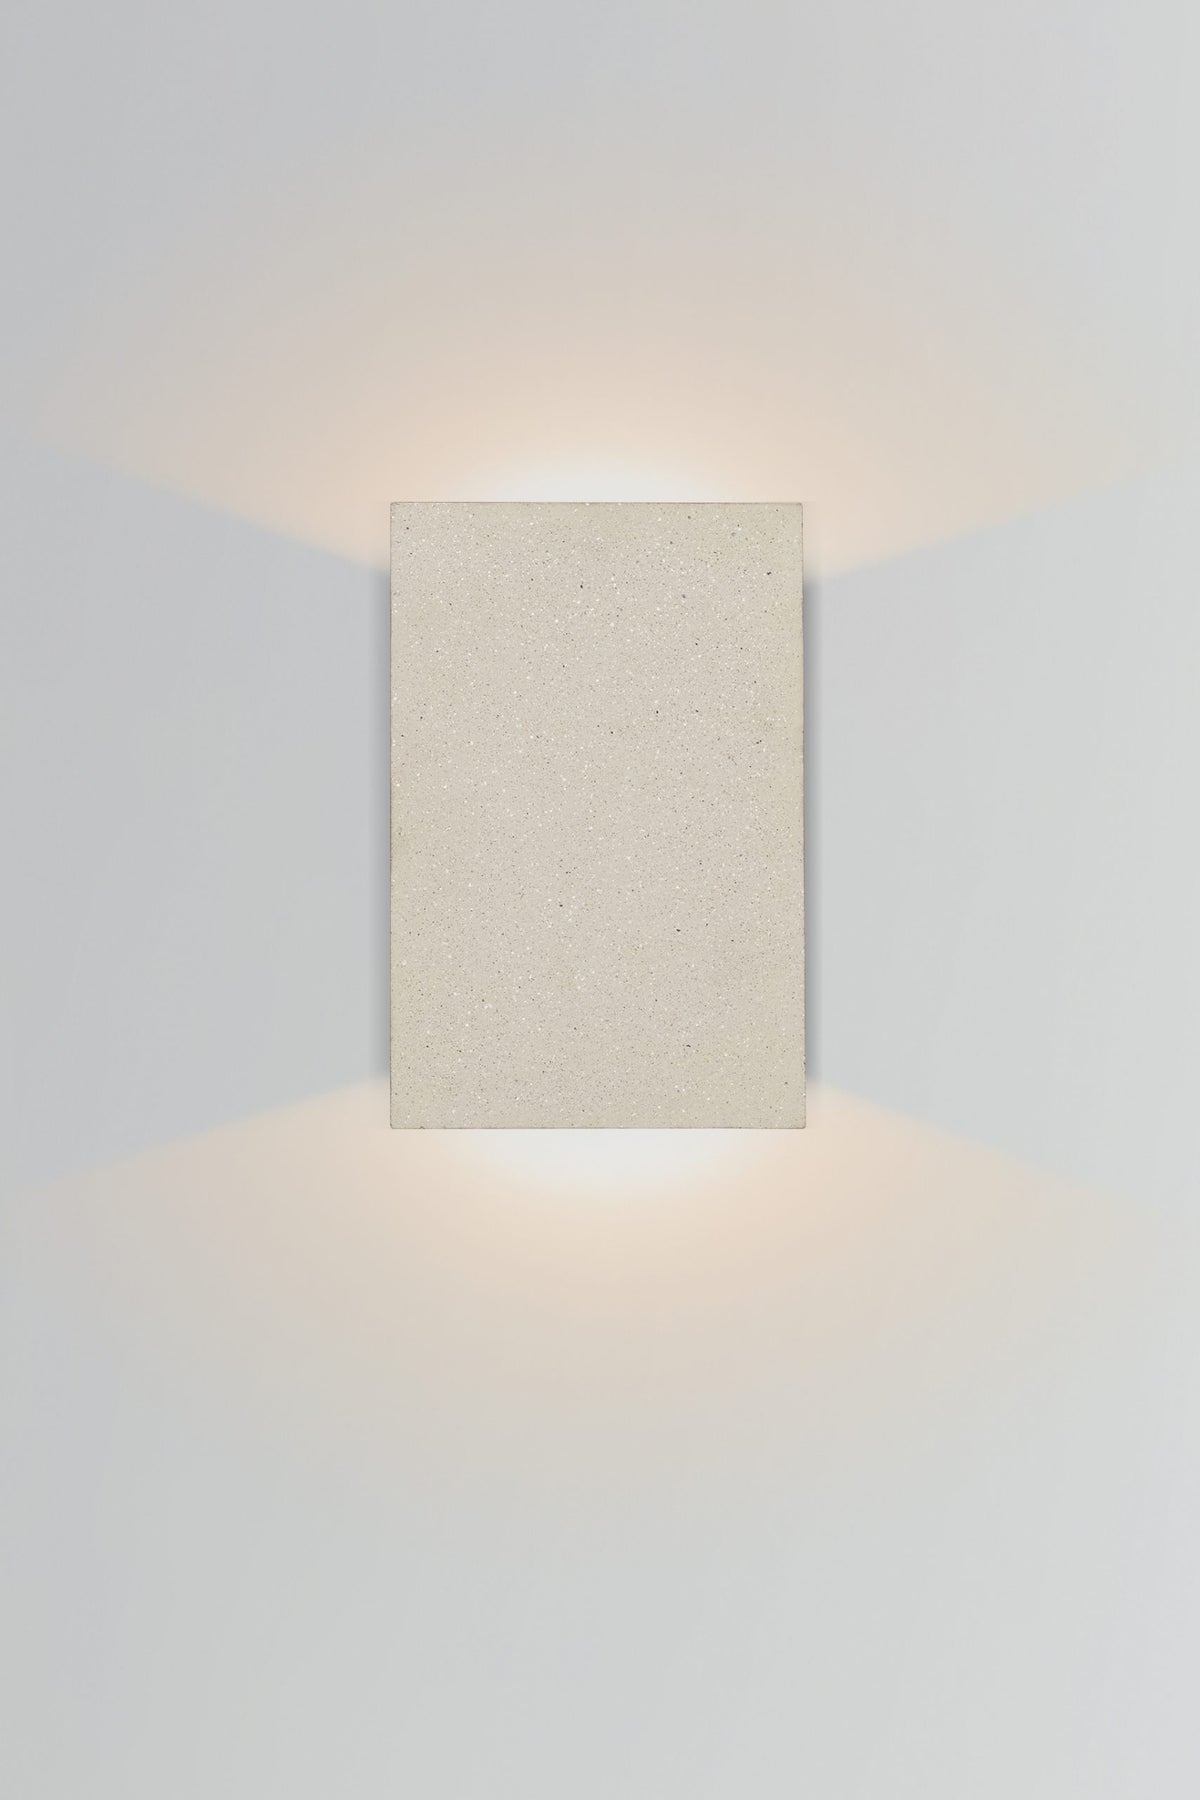 Tersus Outdoor Concrete LED Wall Light by Cerno